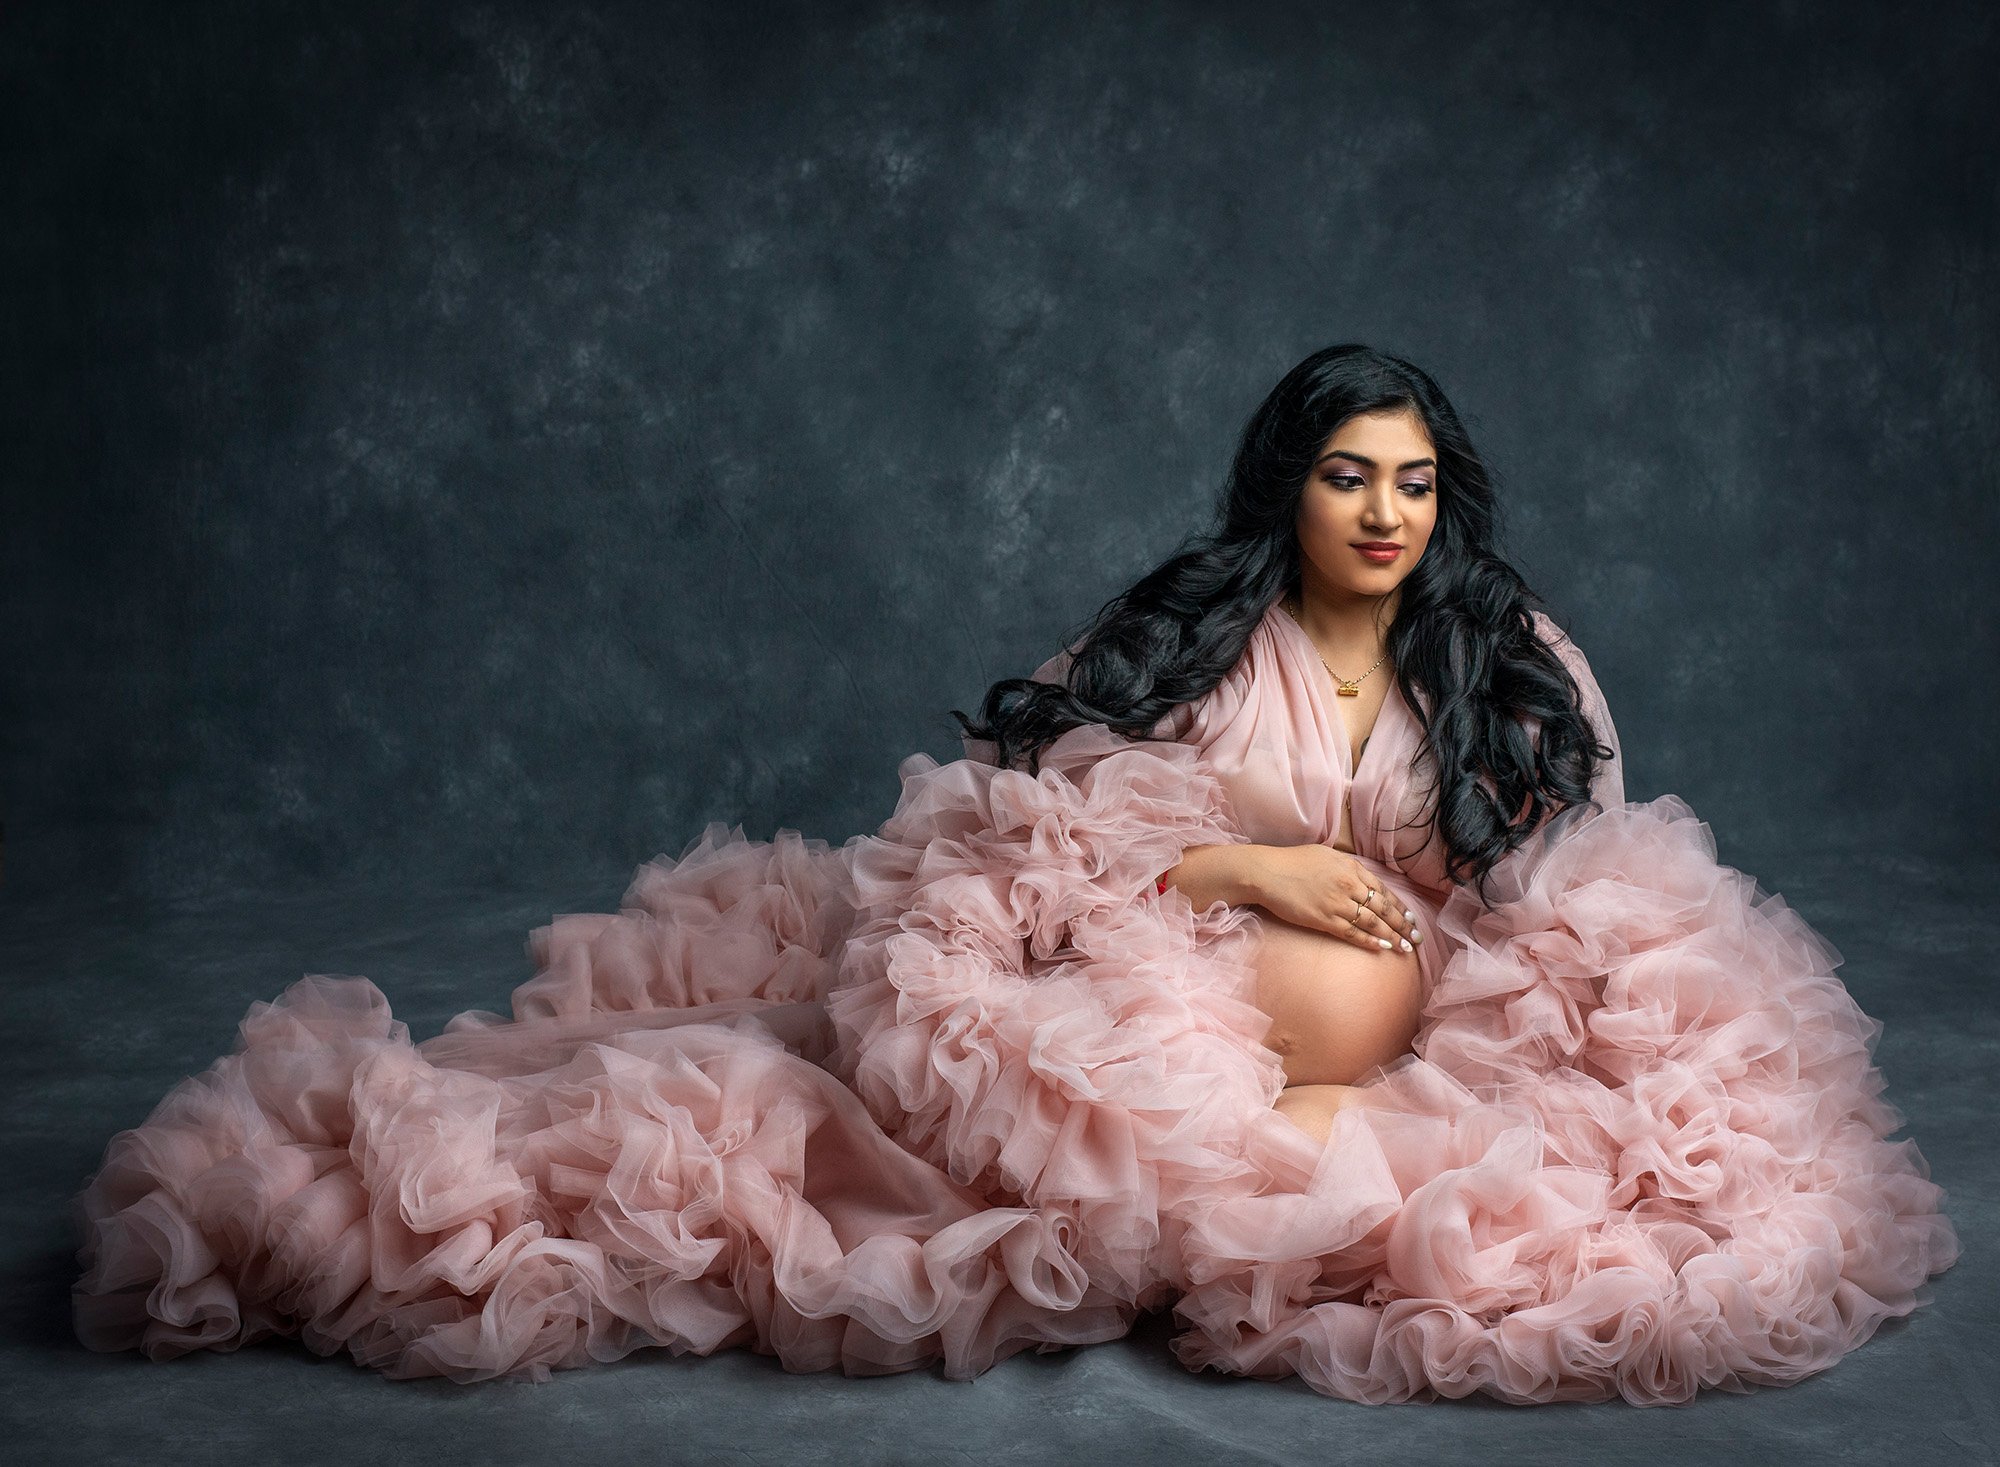 Indian Goddess Maternity photographs pregnant woman sitting down wearing ruffled pink dress exposing pregnant stomach